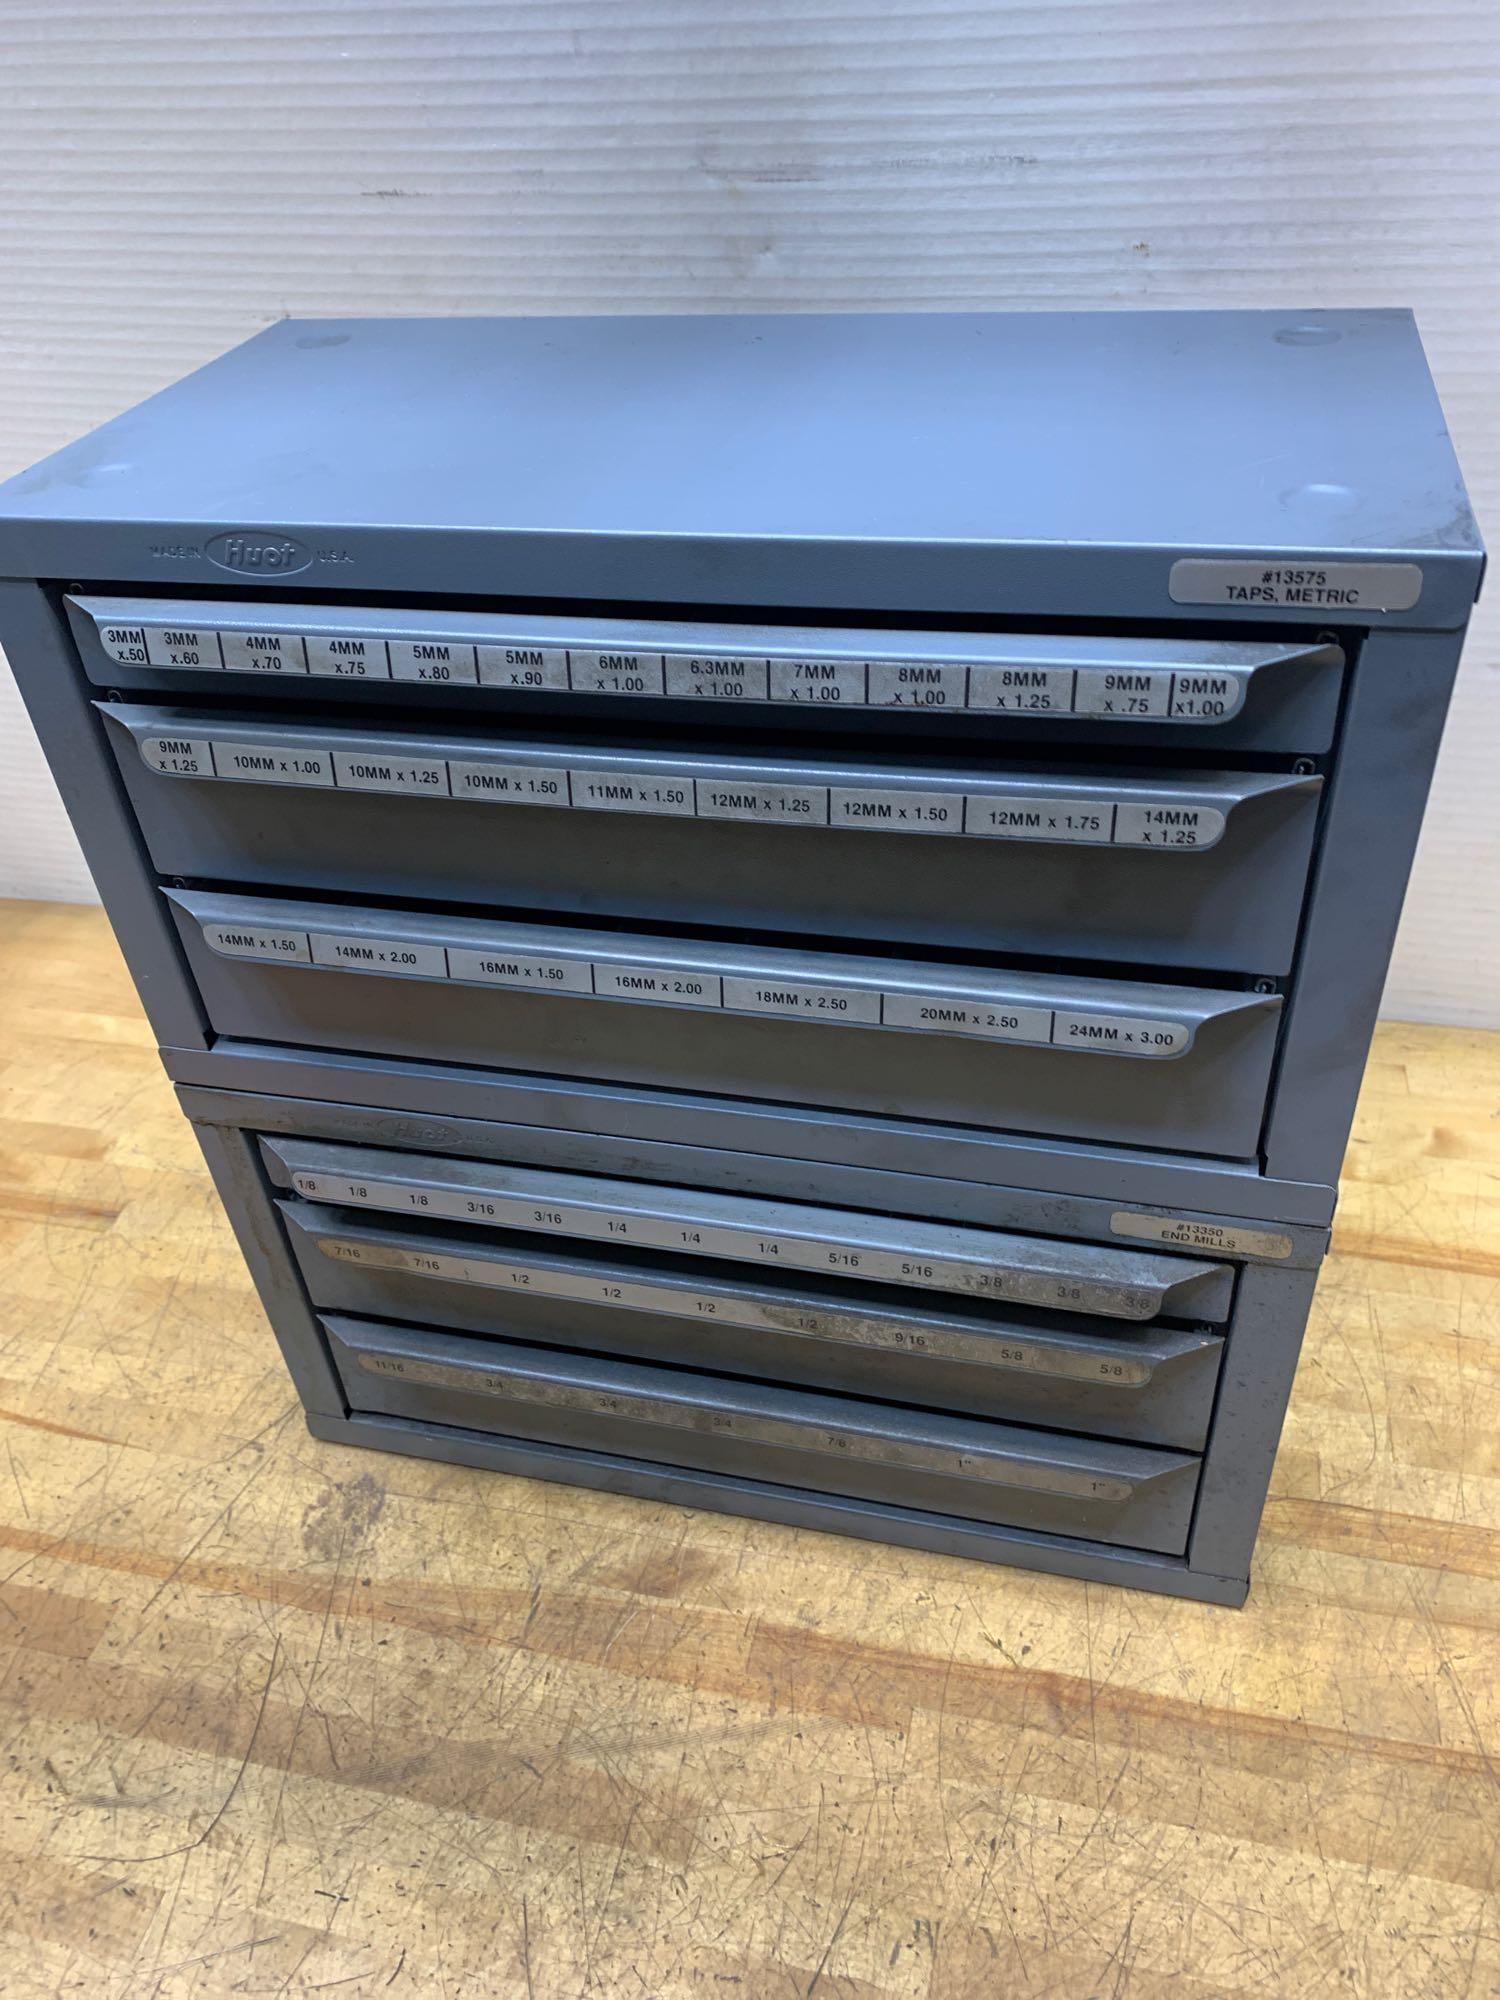 2 Huot 3 Drawer Index Parts Cabinets With A Surplus Auction